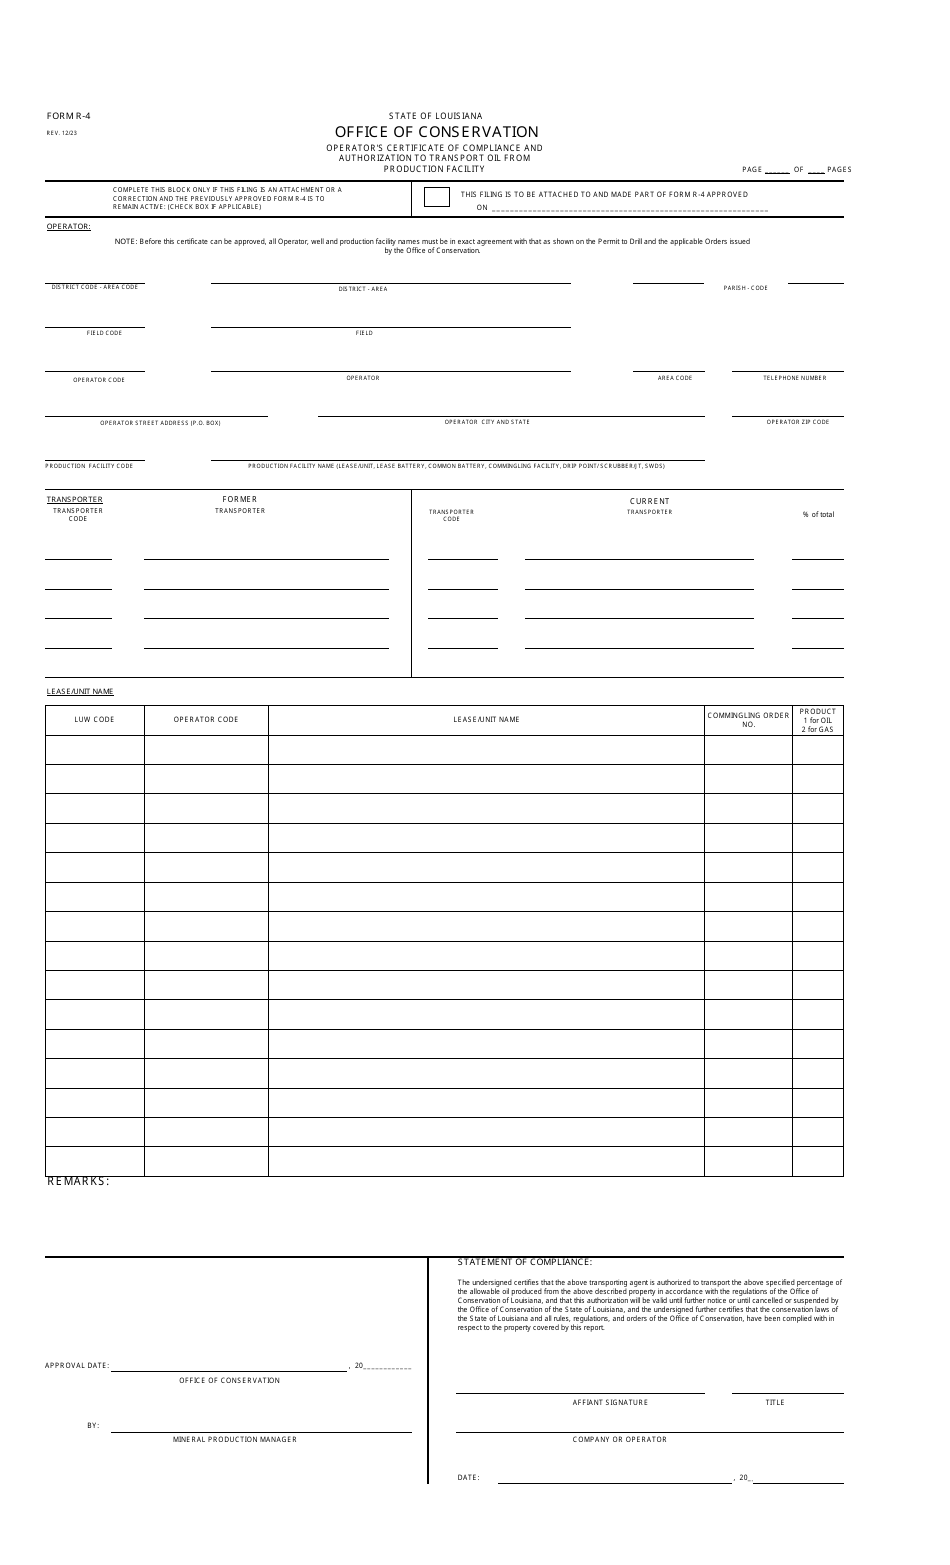 Form R-4 Operators Certificate of Compliance and Authorization to Transport Oil From Production Facility - Louisiana, Page 1